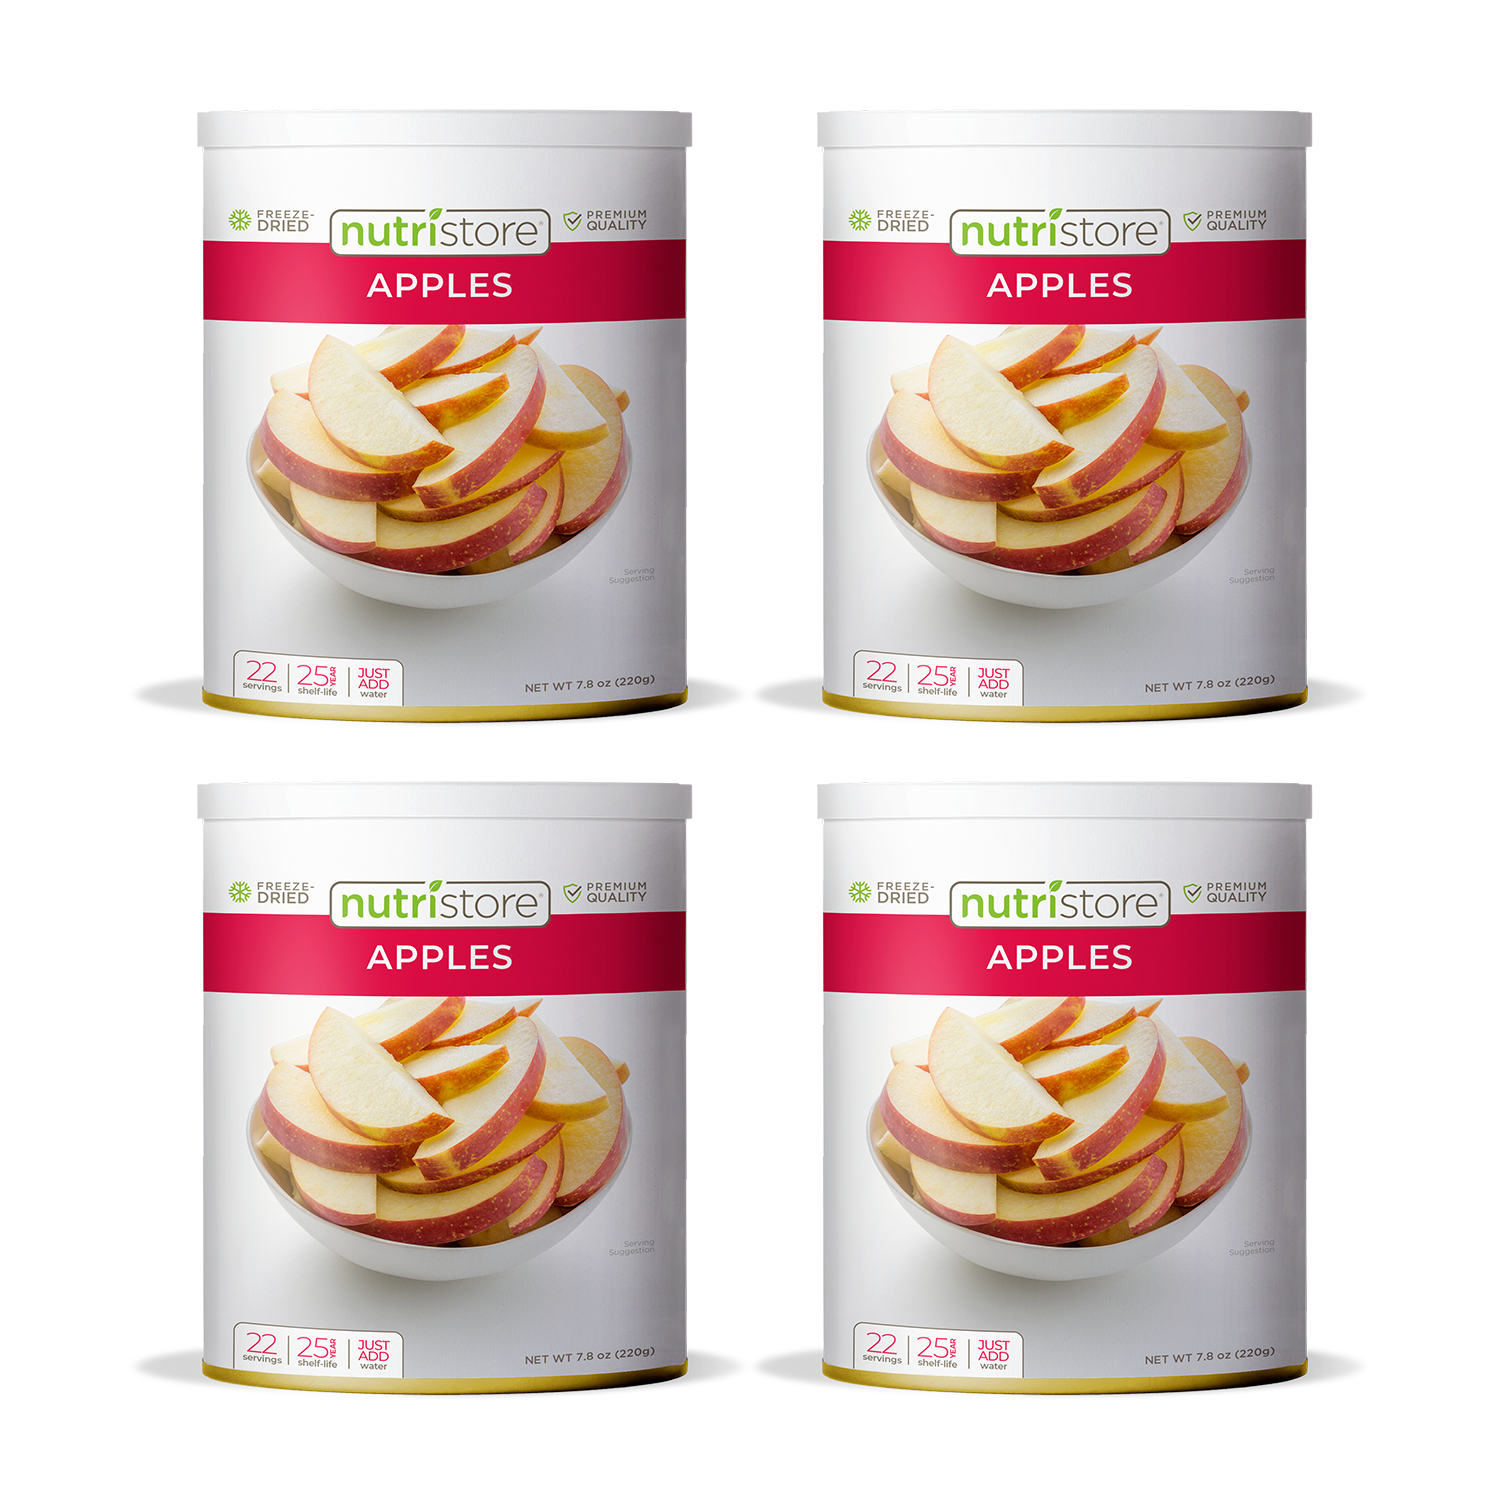 Large Fuji Apple - Each, Large/ 1 Count - Fry's Food Stores